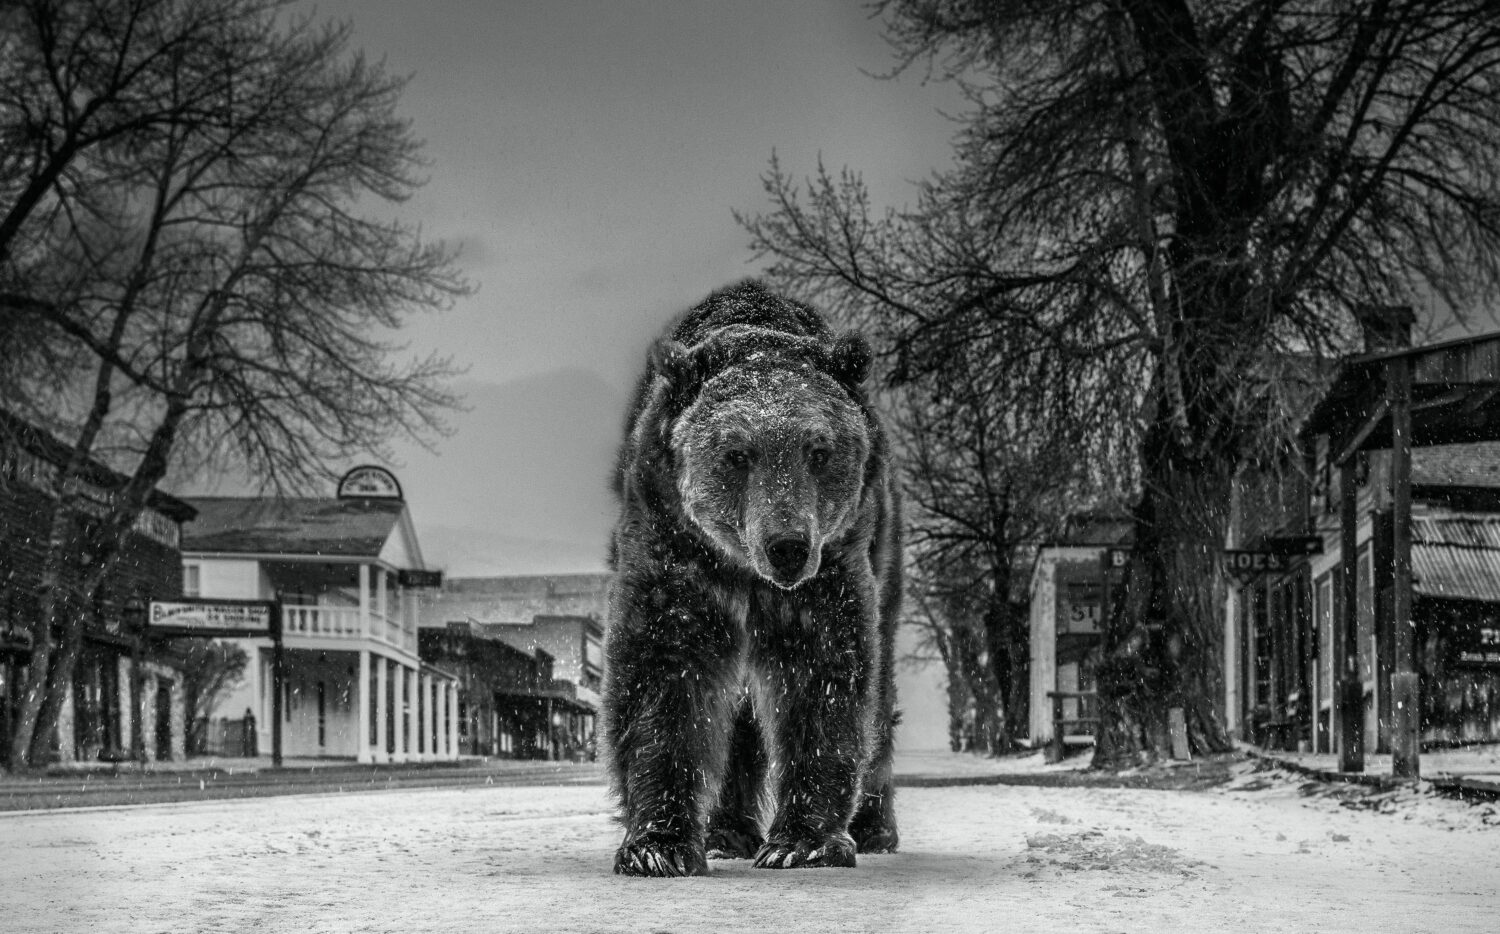 David Yarrow: Out of Towner